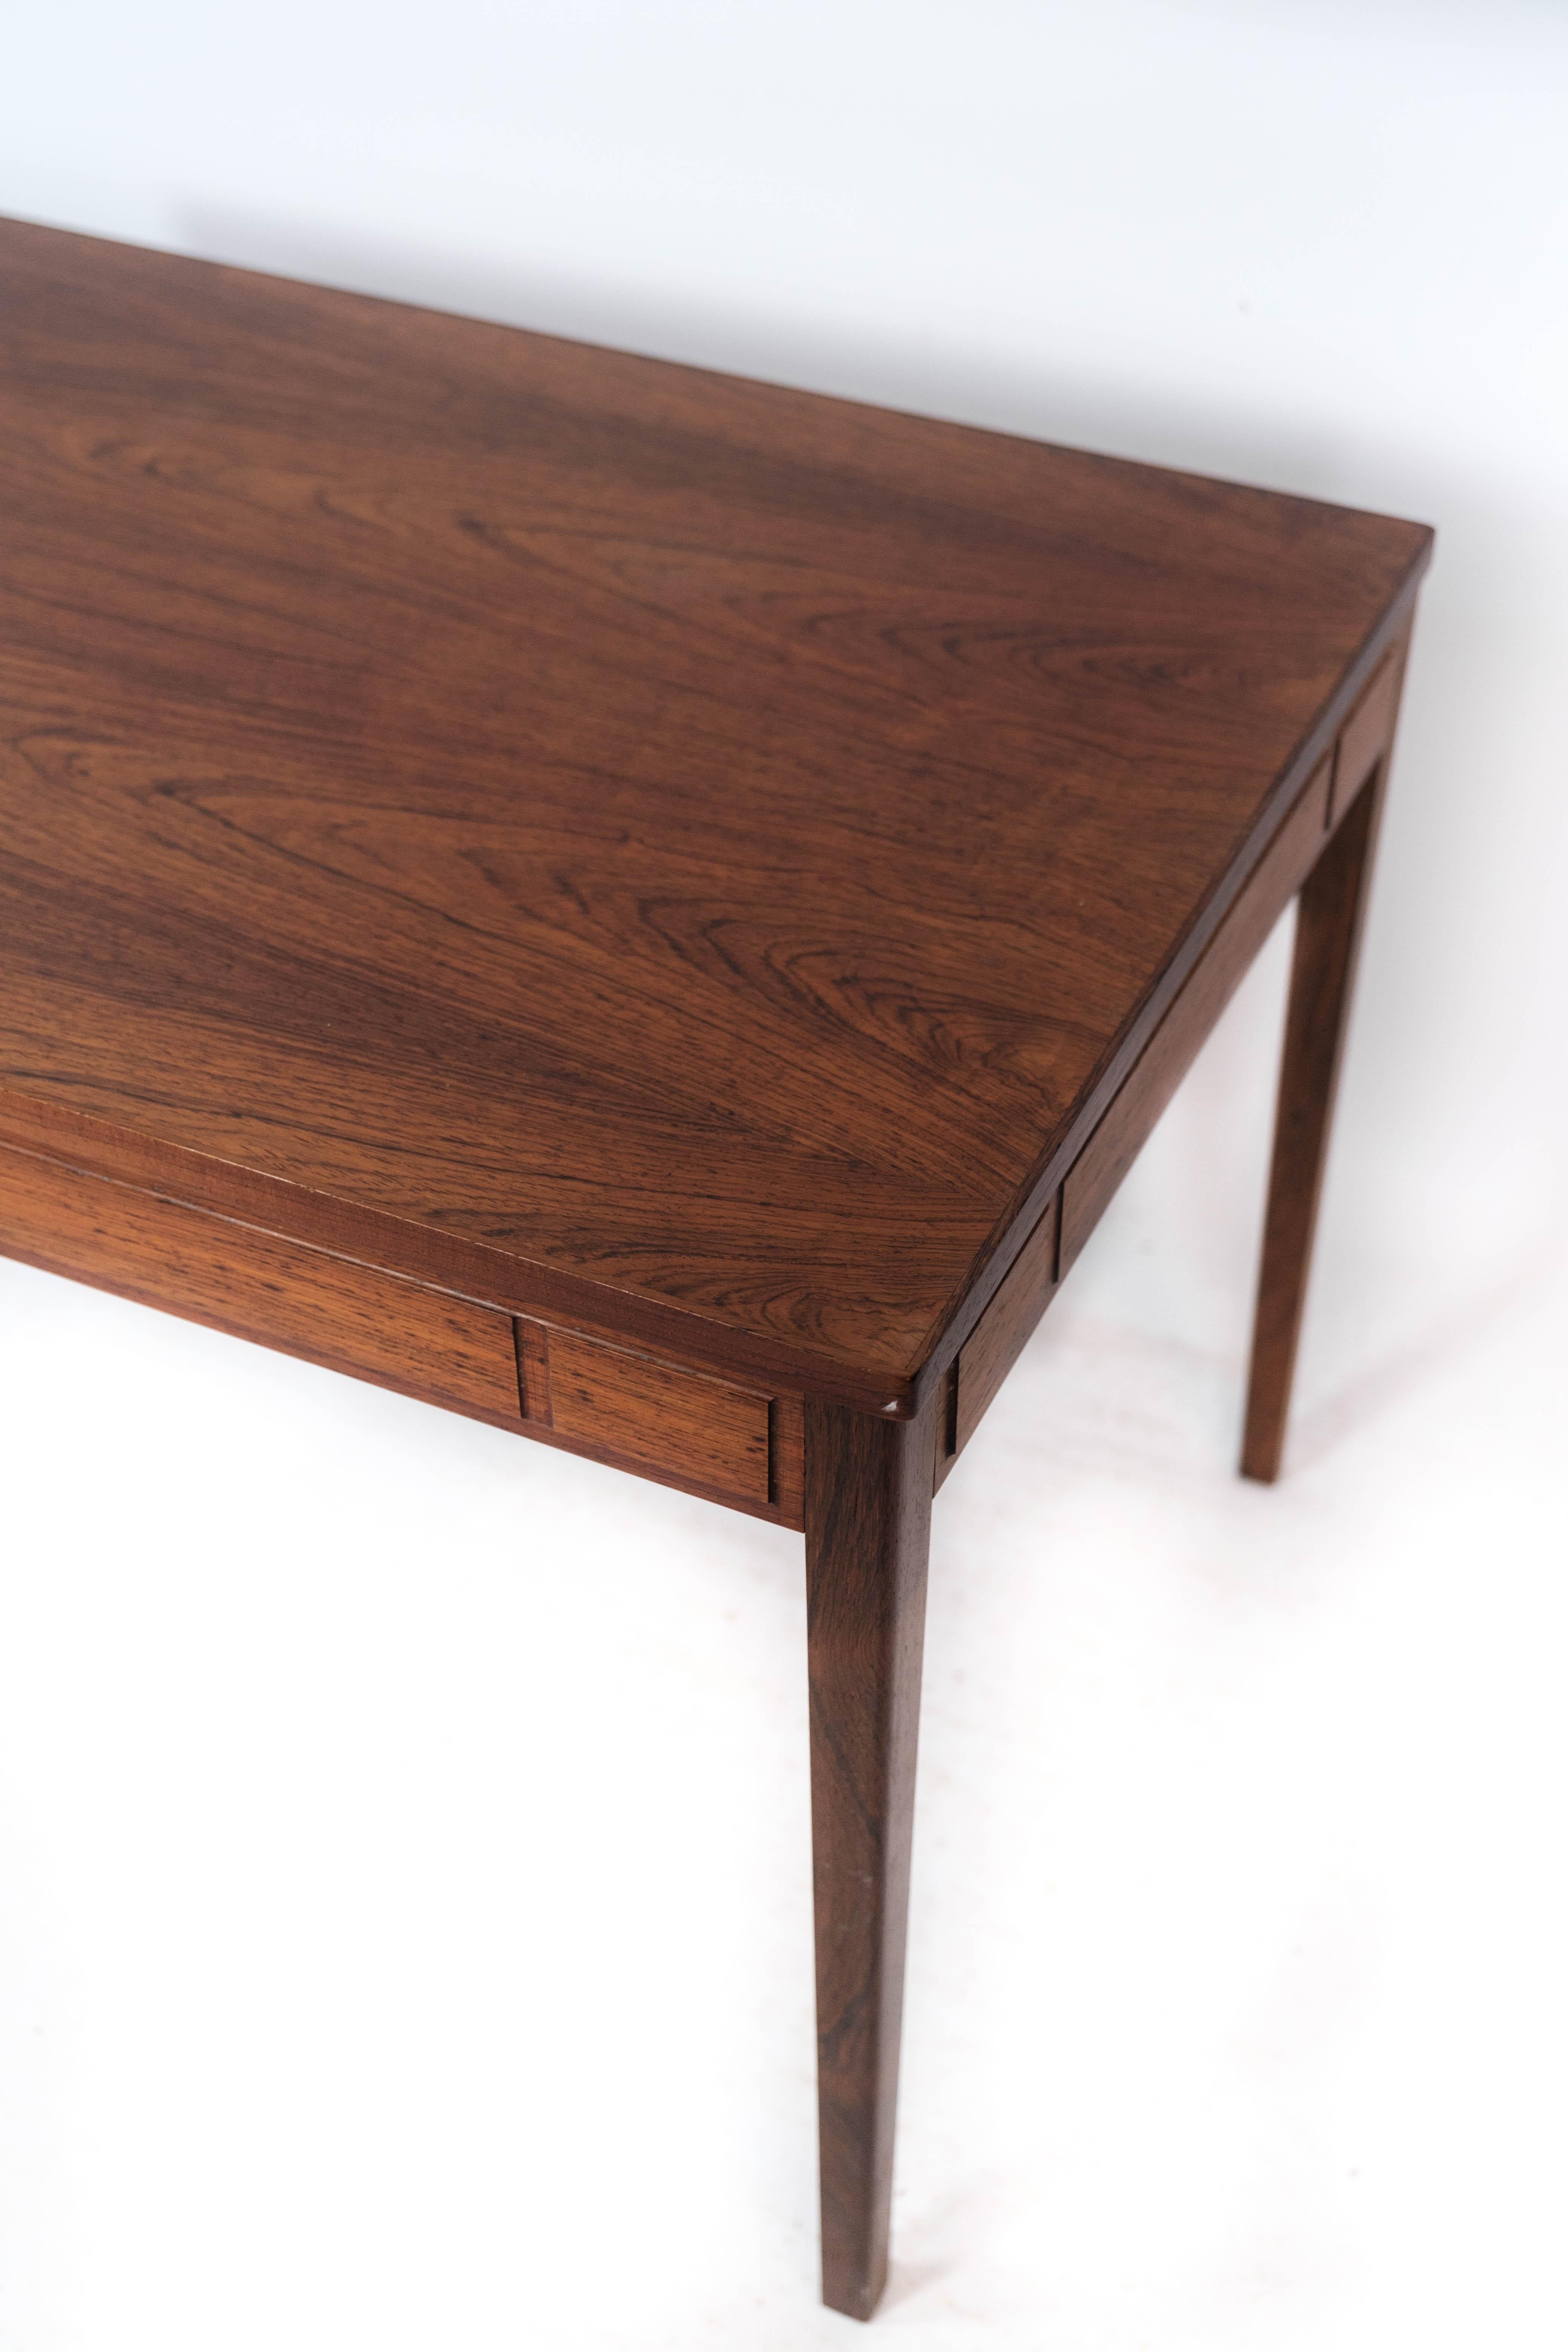 Mid-20th Century Side Table Made In Rosewood Of Danish Design From 1960s For Sale